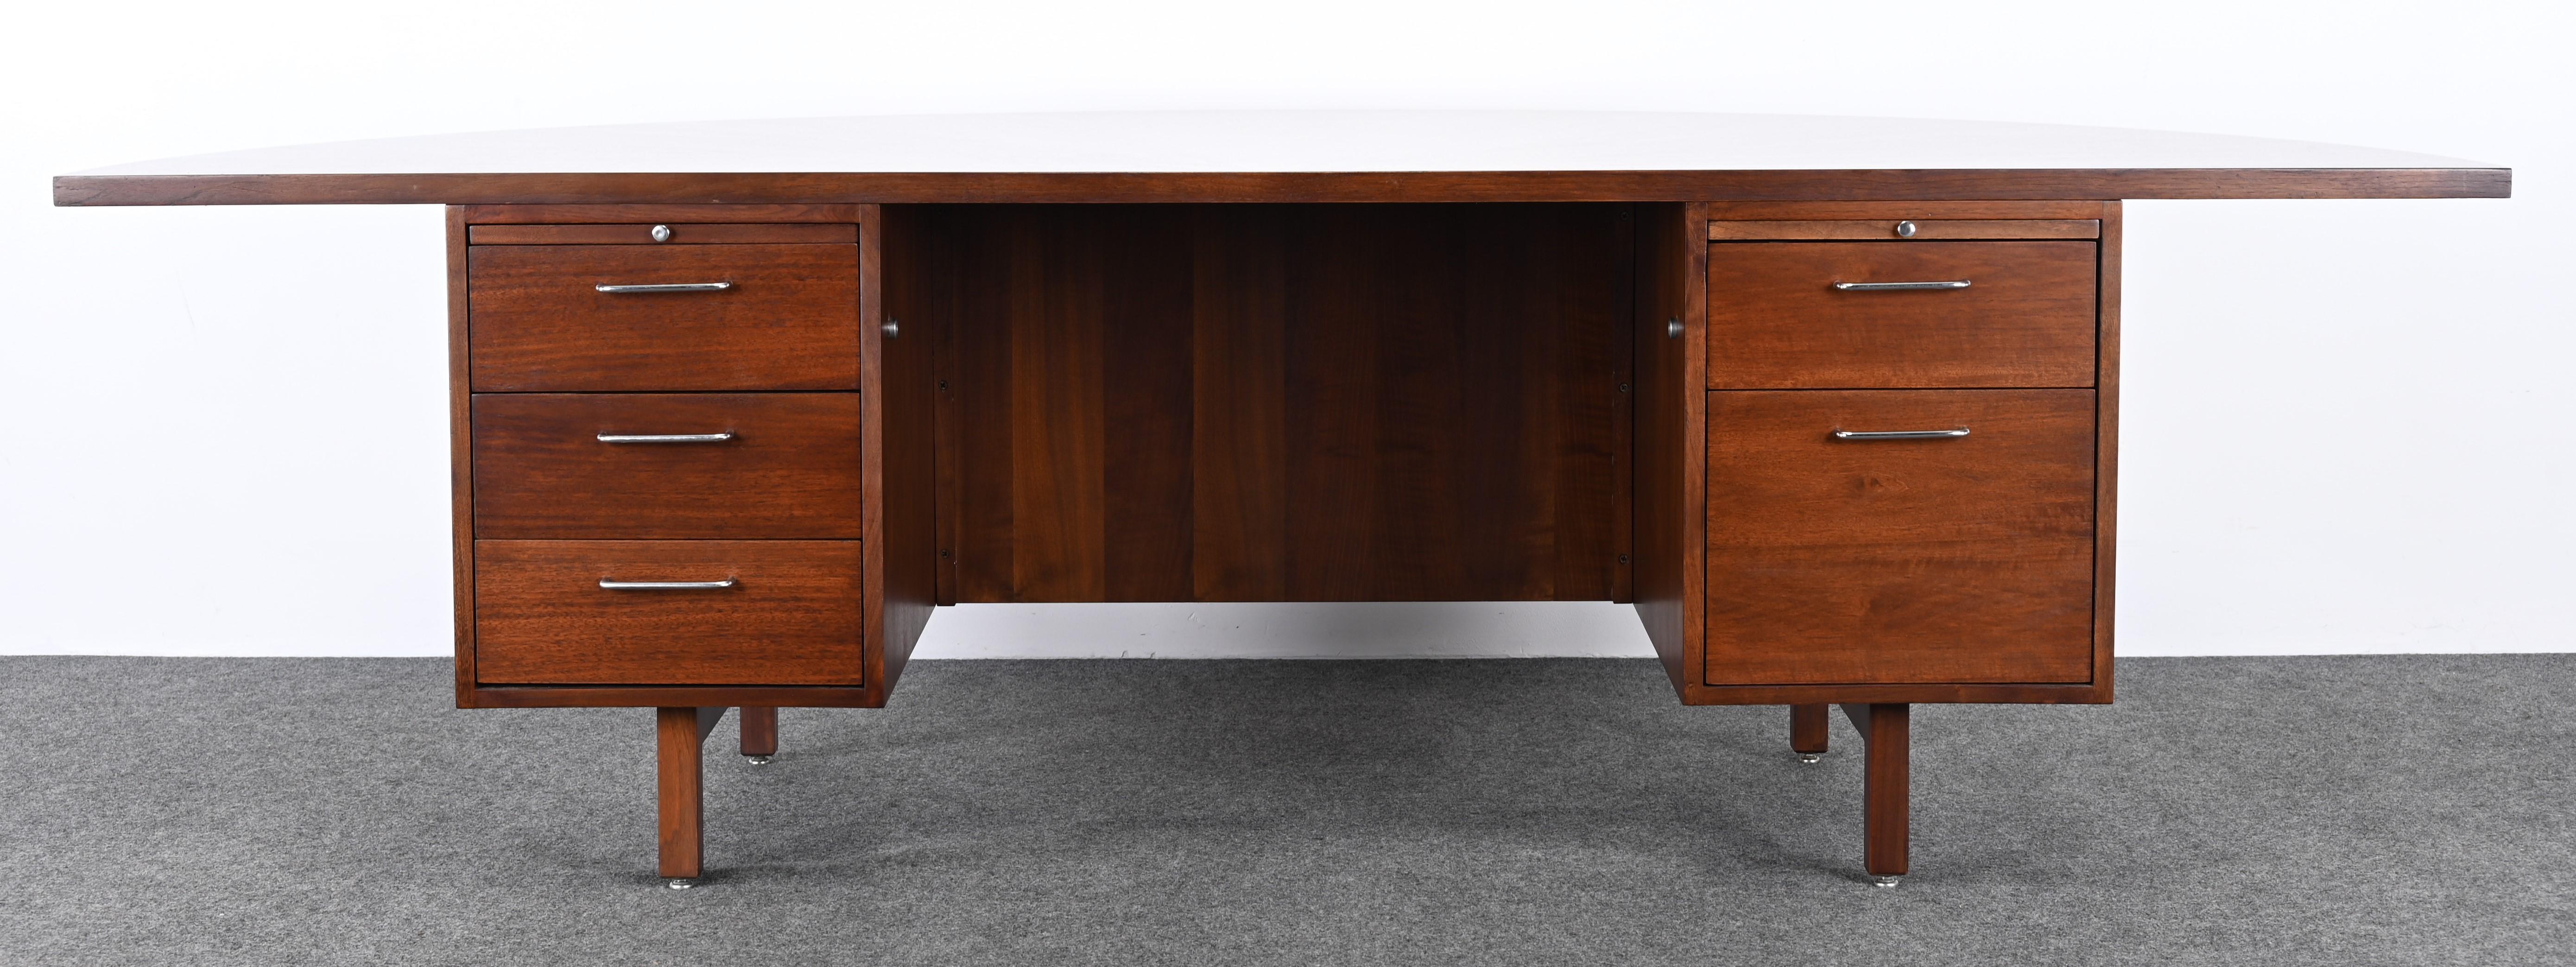 A rare walnut Demi Lune Executive desk by Jens Risom, 1950. This beautiful desk has been fully restored in a dark walnut finish. This desk would work well in any Mid-Century Modern home, as well as, Traditional or Contemporary. Structurally sound